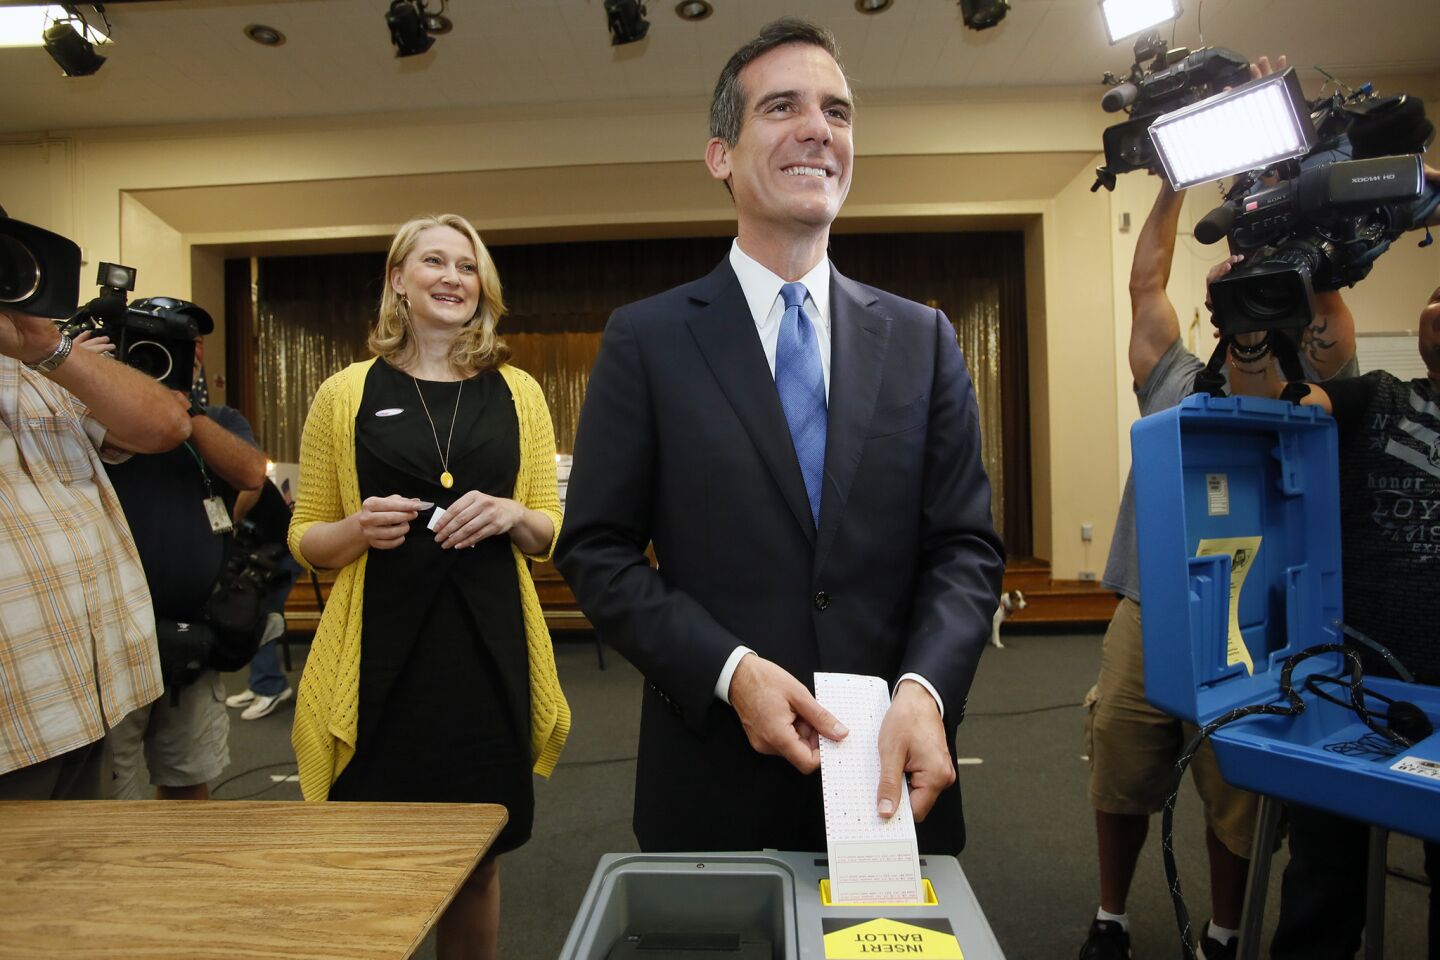 Mayoral candidate Eric Garcetti, with wife Amy Wakeland, casts his ballot at Allesandro Elementary School in Silver Lake.